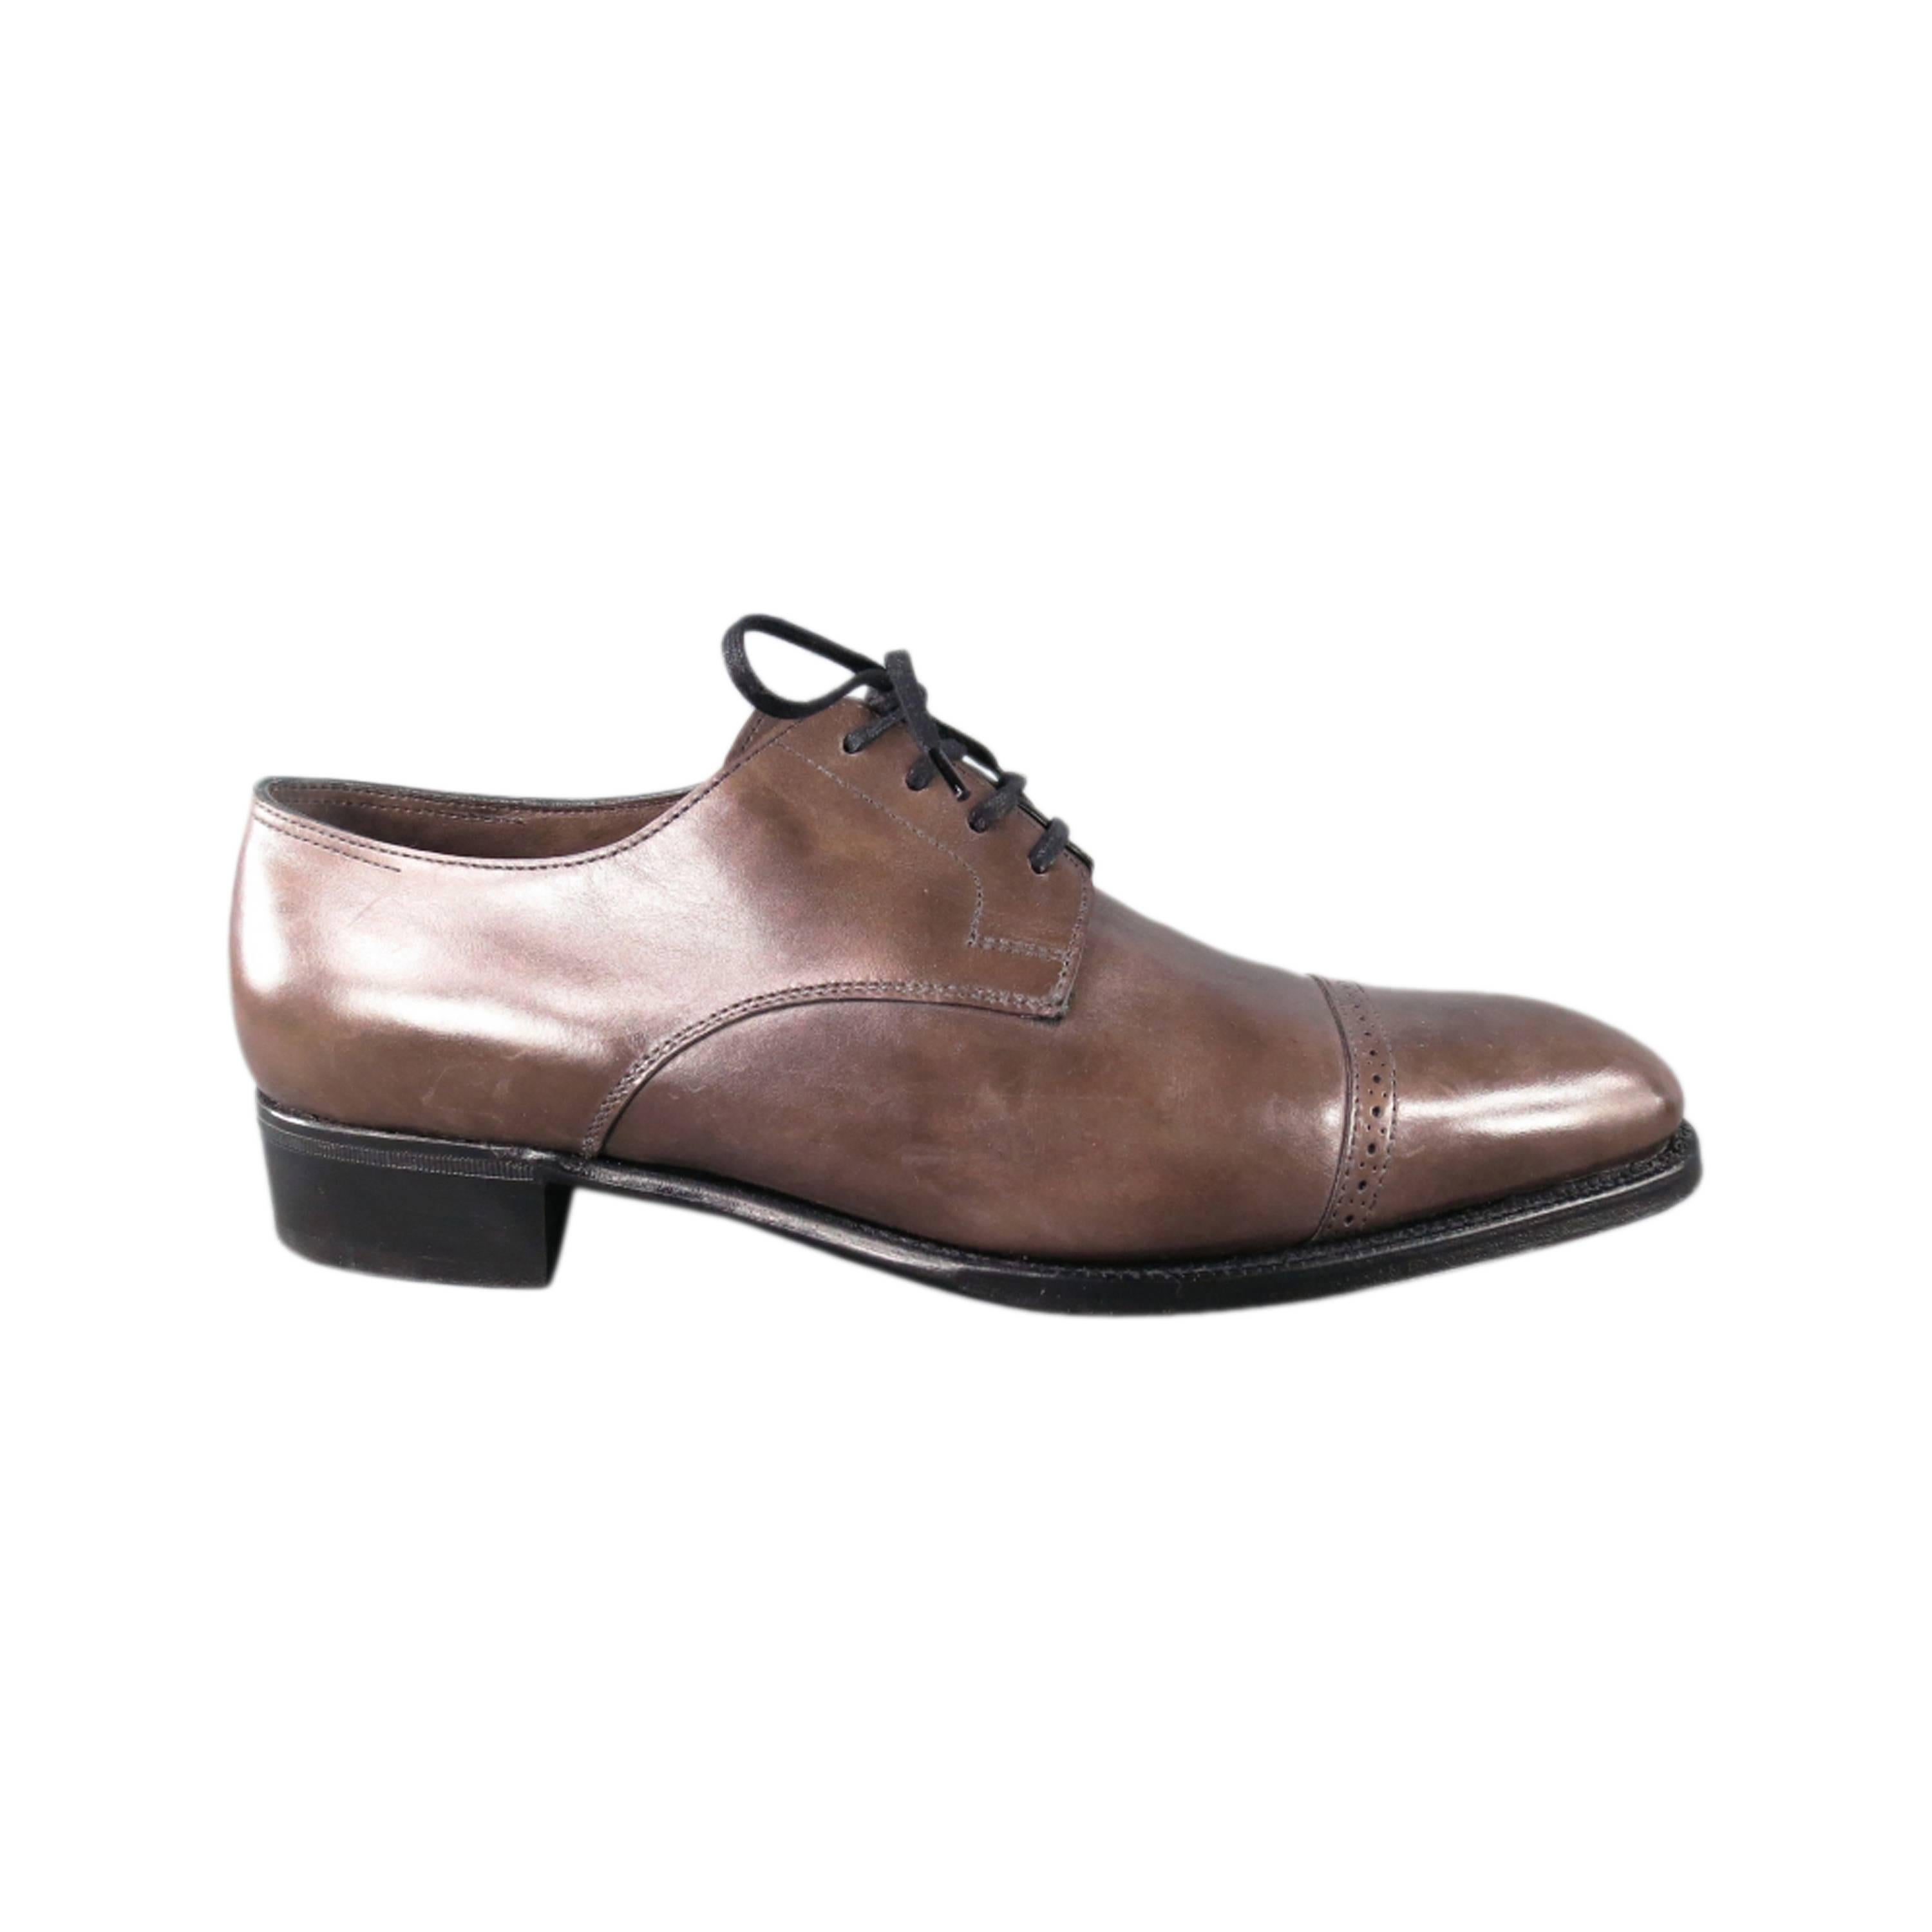 JOHN LOBB "PHILIP II DERBY" Size 7 Taupe Leather Lace Up